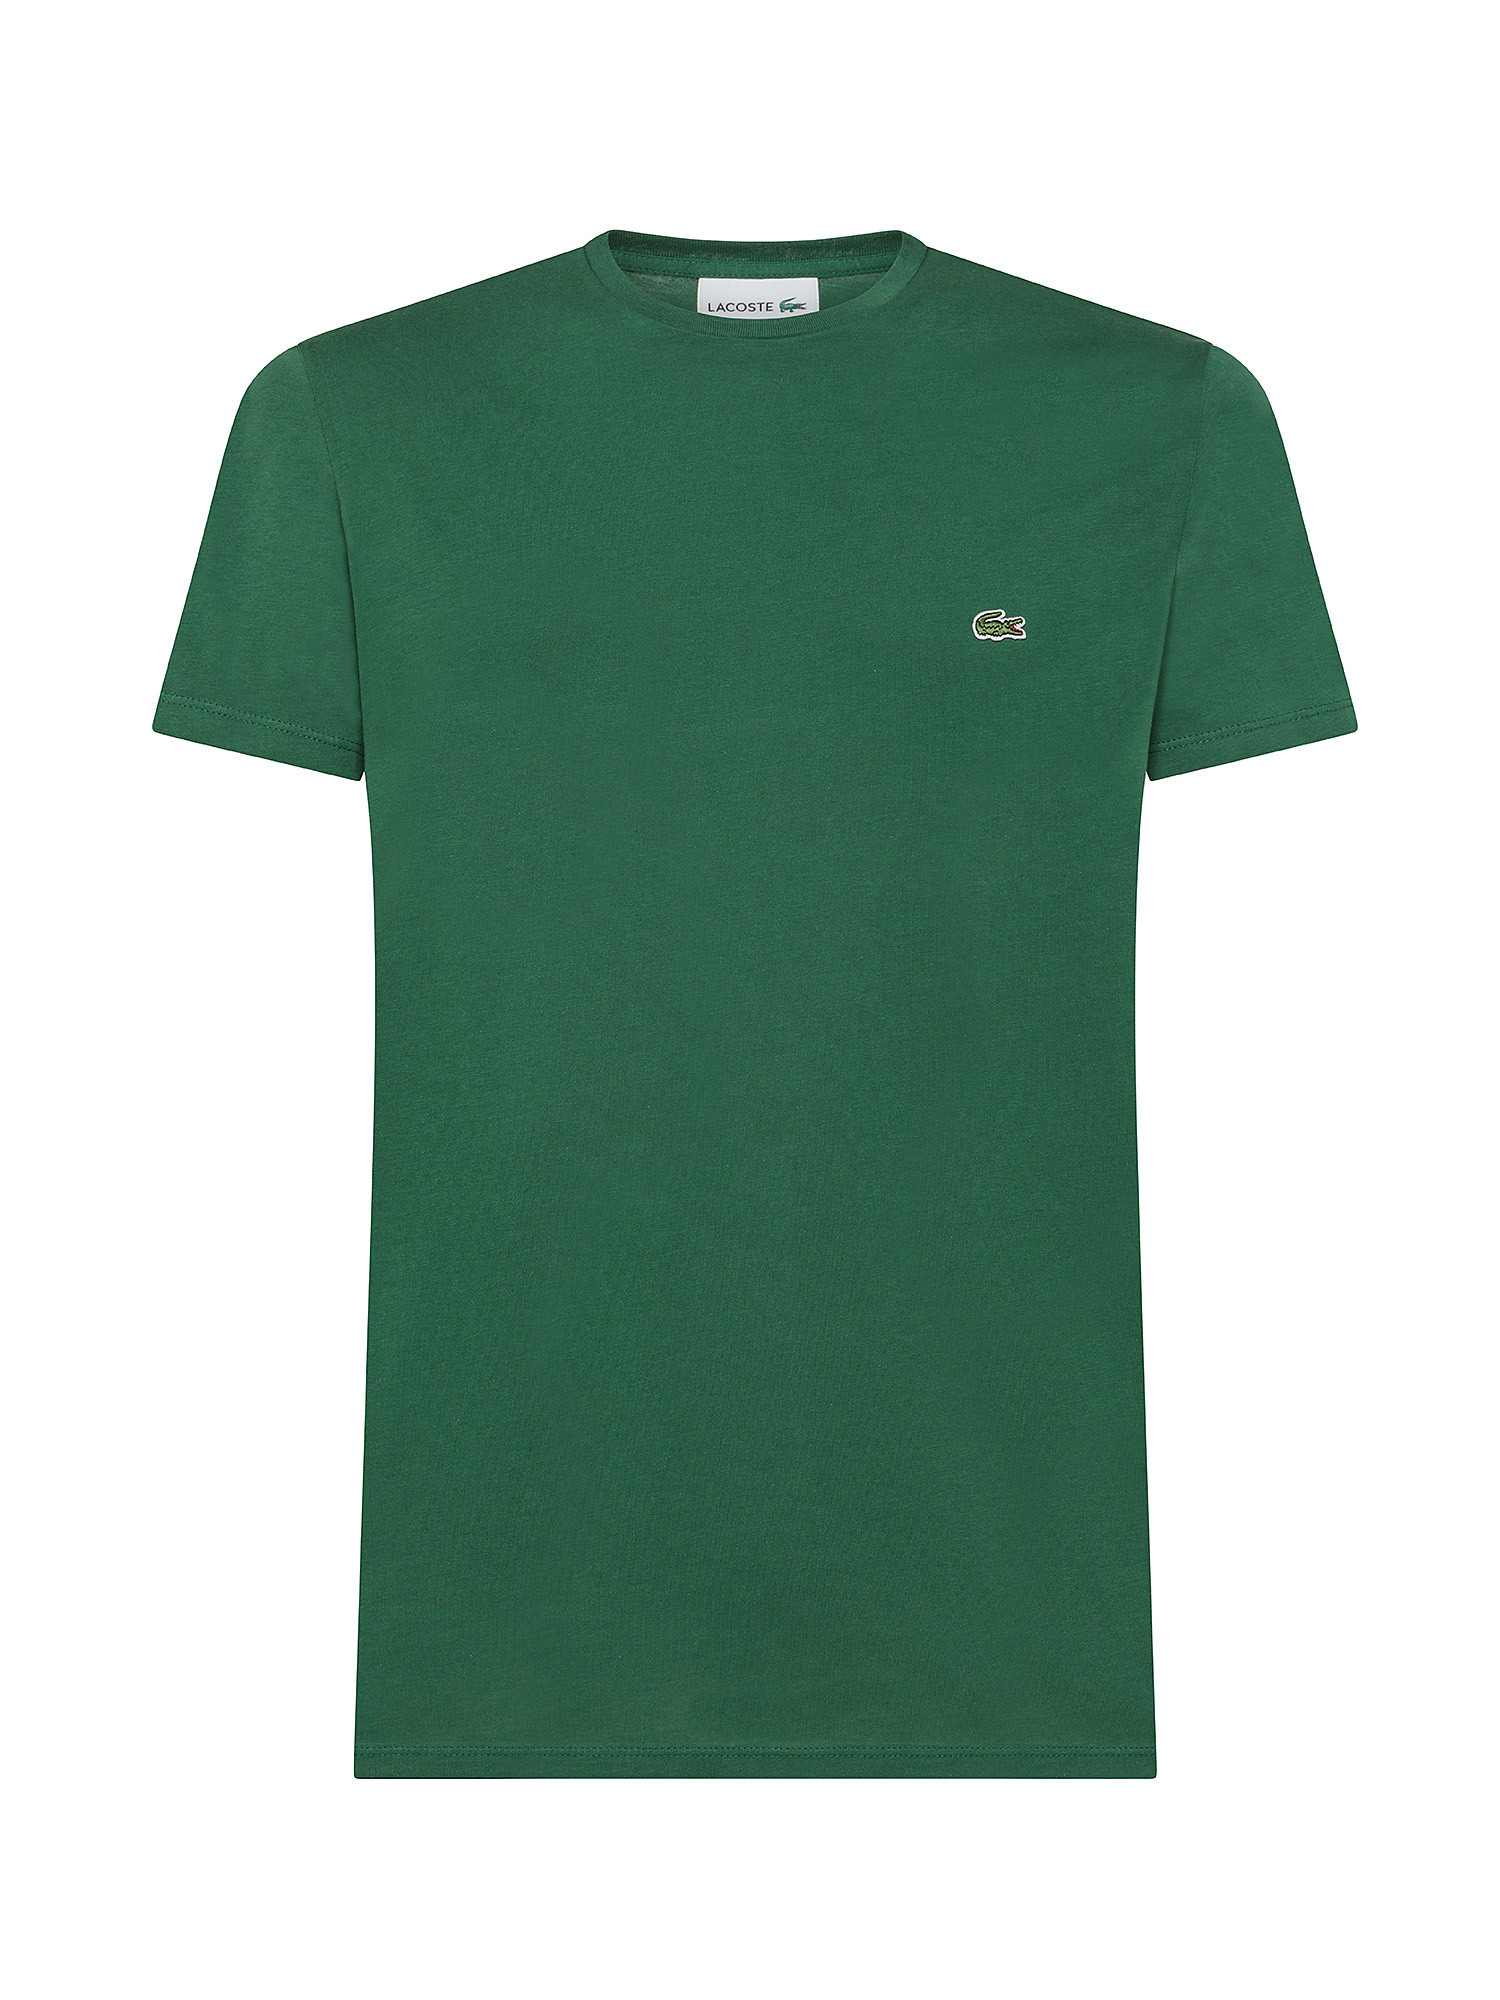 Lacoste - T-shirt girocollo in jersey di cotone Pima, Verde, large image number 0